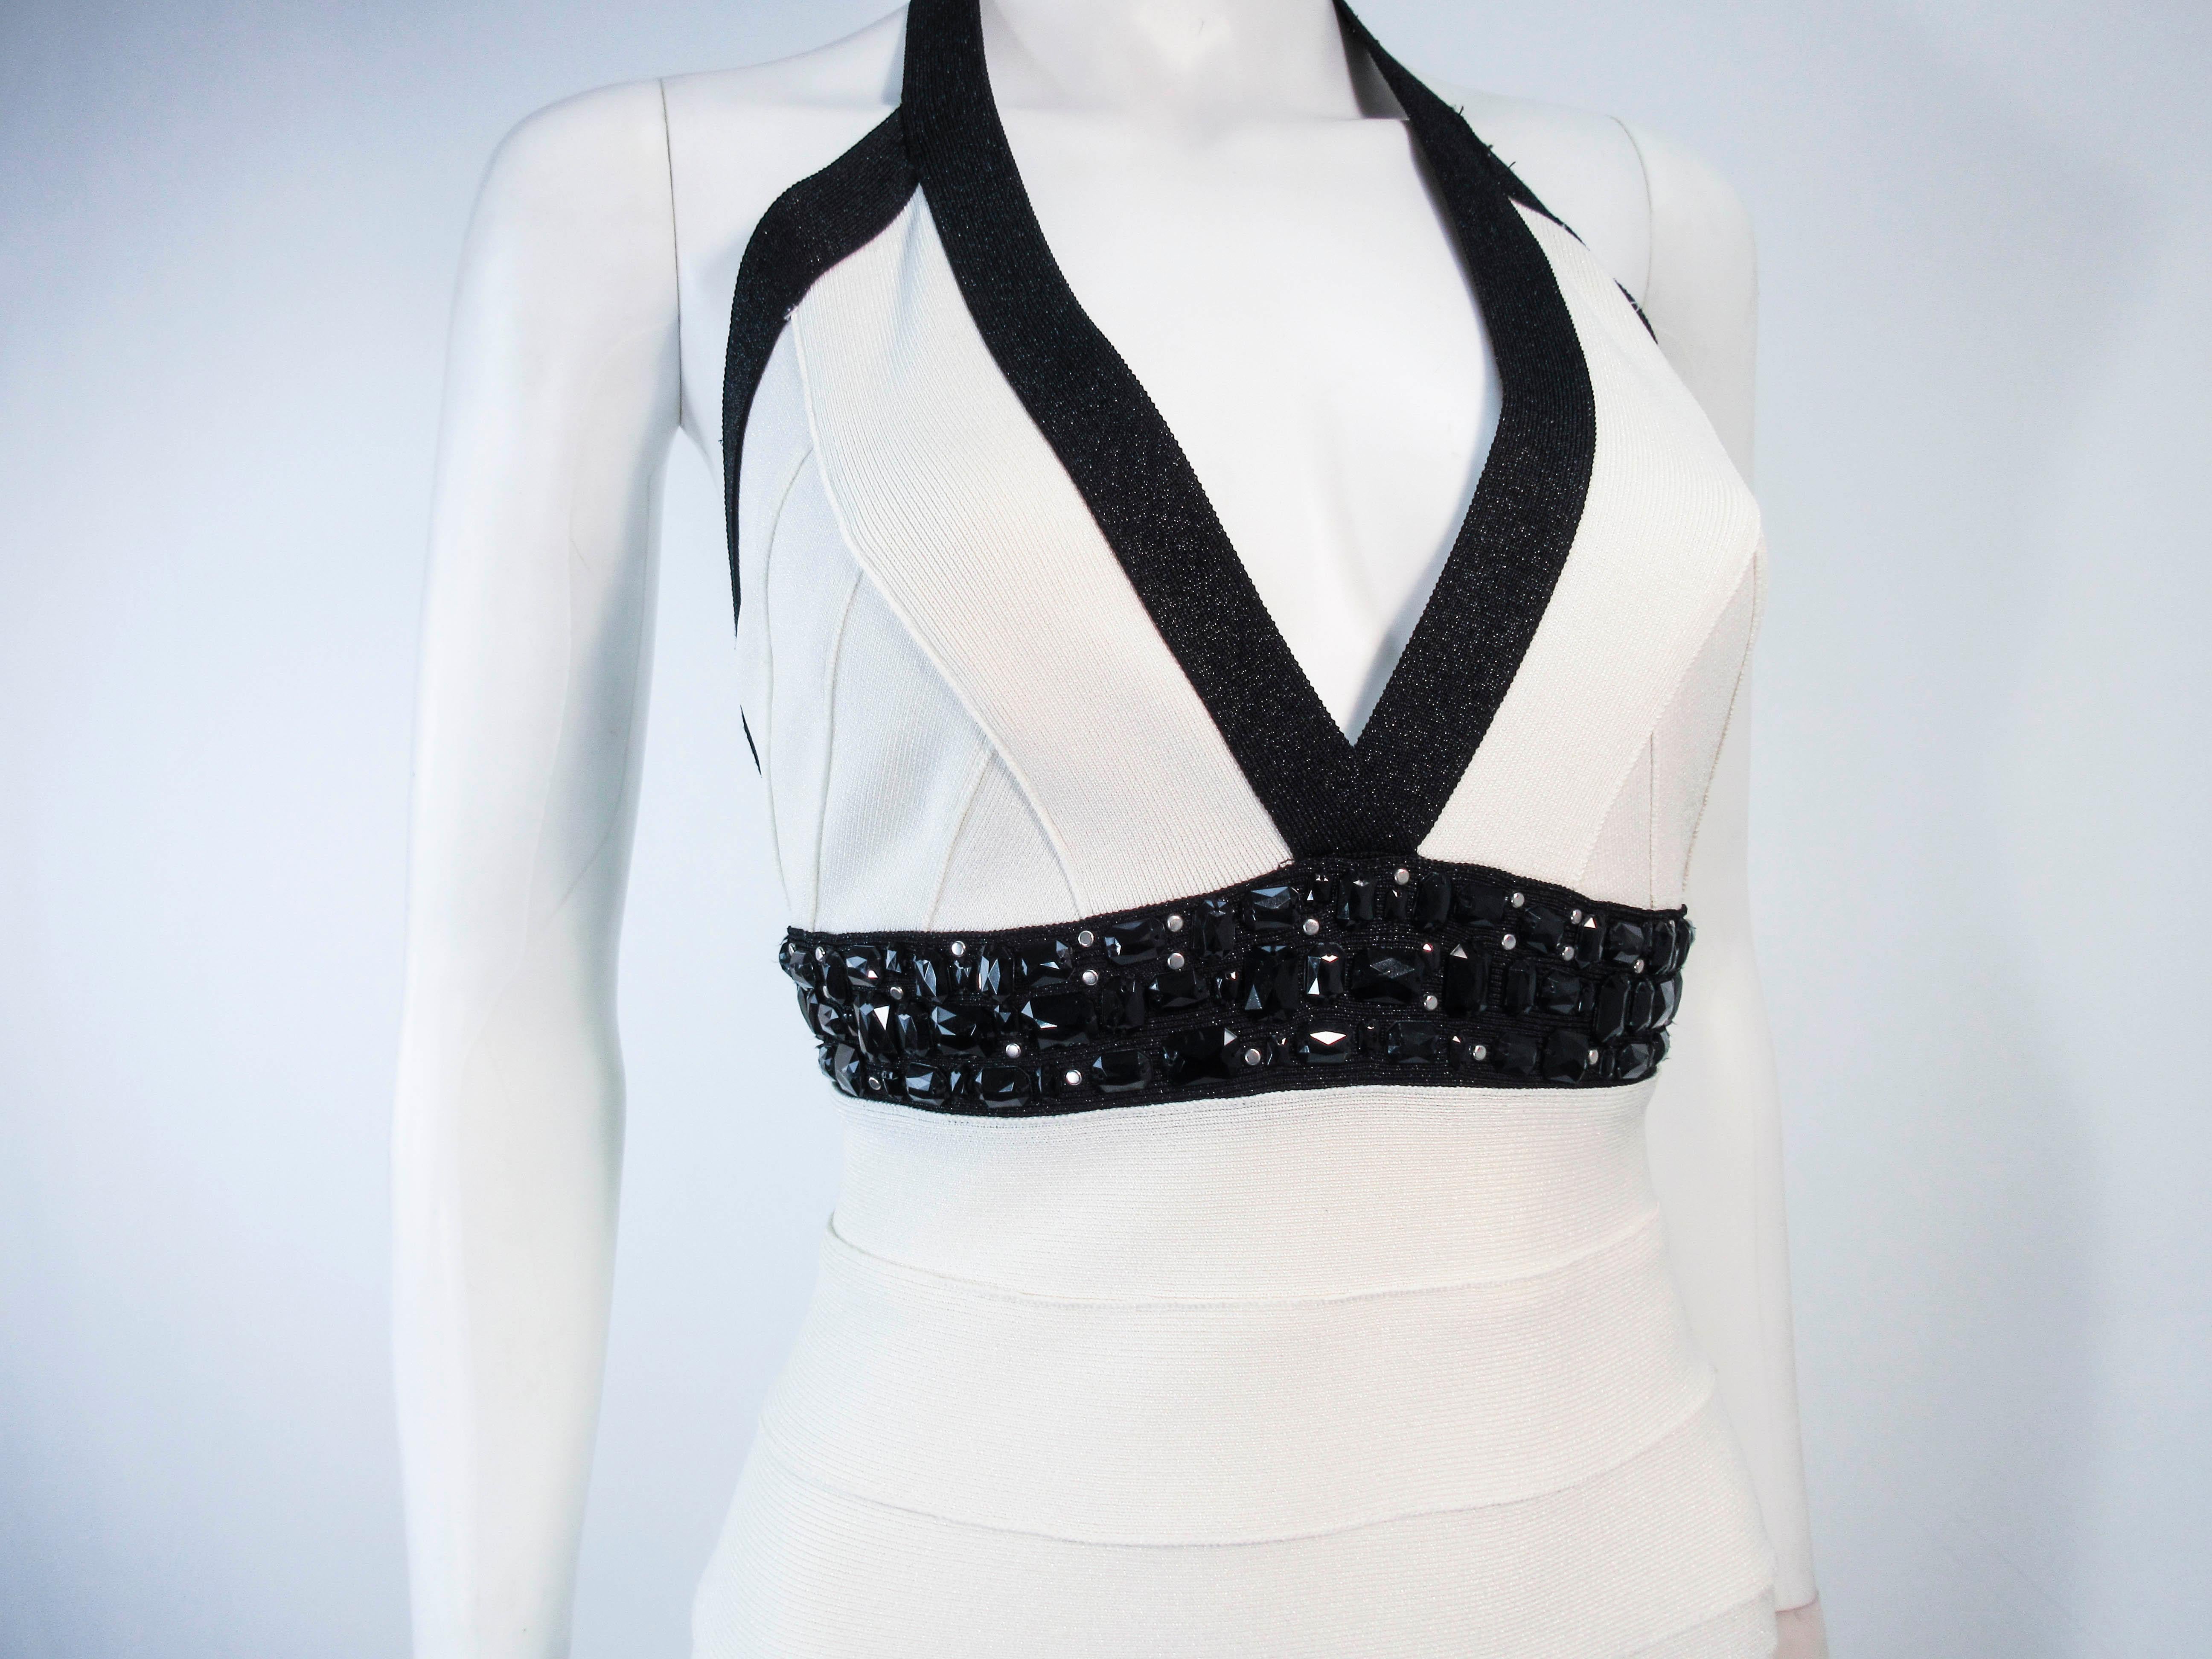 Herve Leger Black and White Metallic Body-con Bandage Dress with Beaded Accents 3